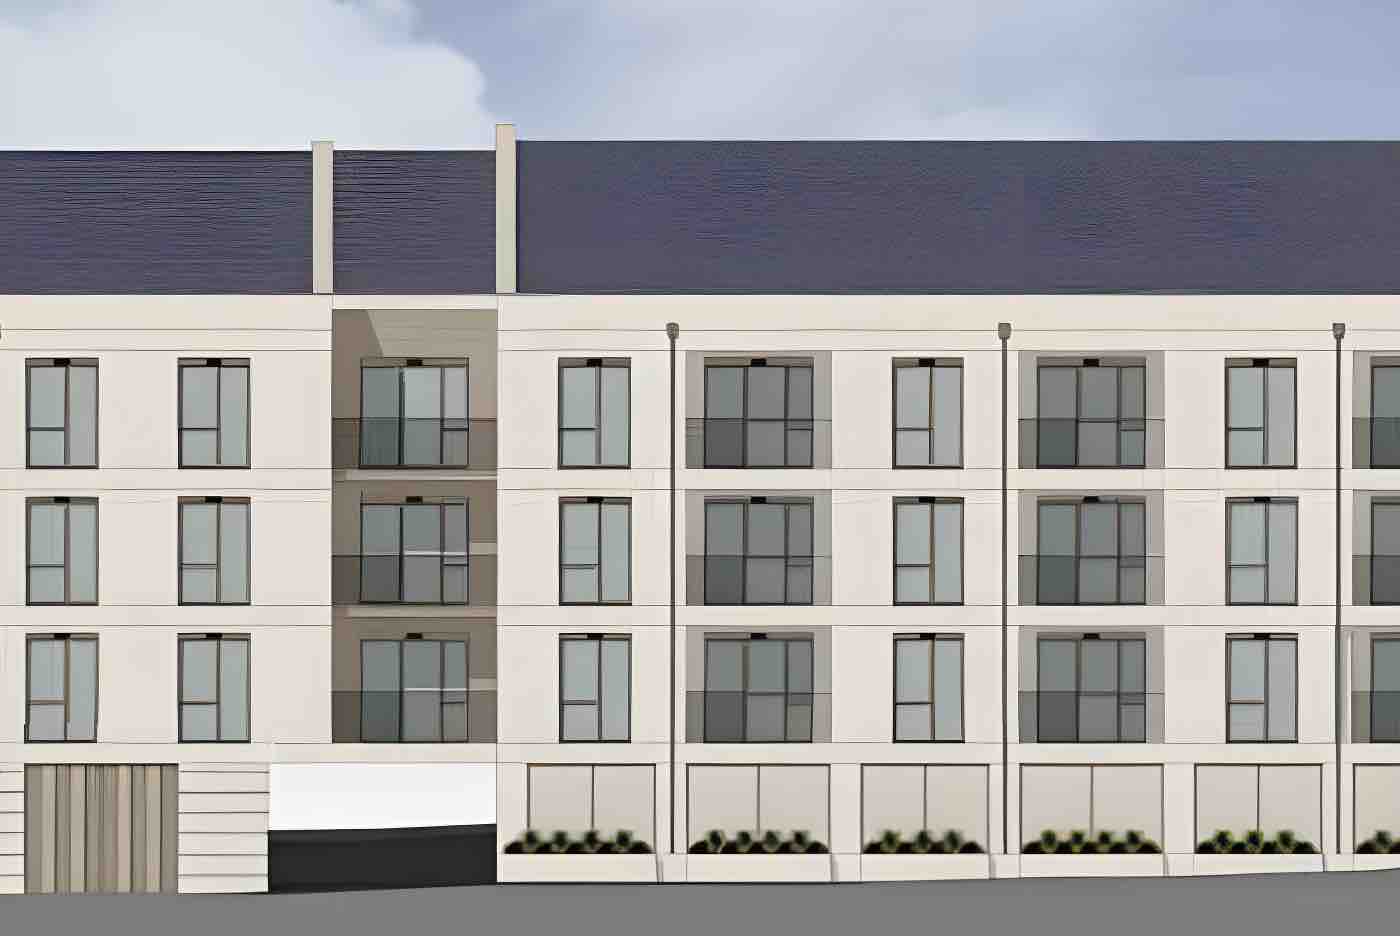 32 Apartments for Dunstable, Central Bedfordshire